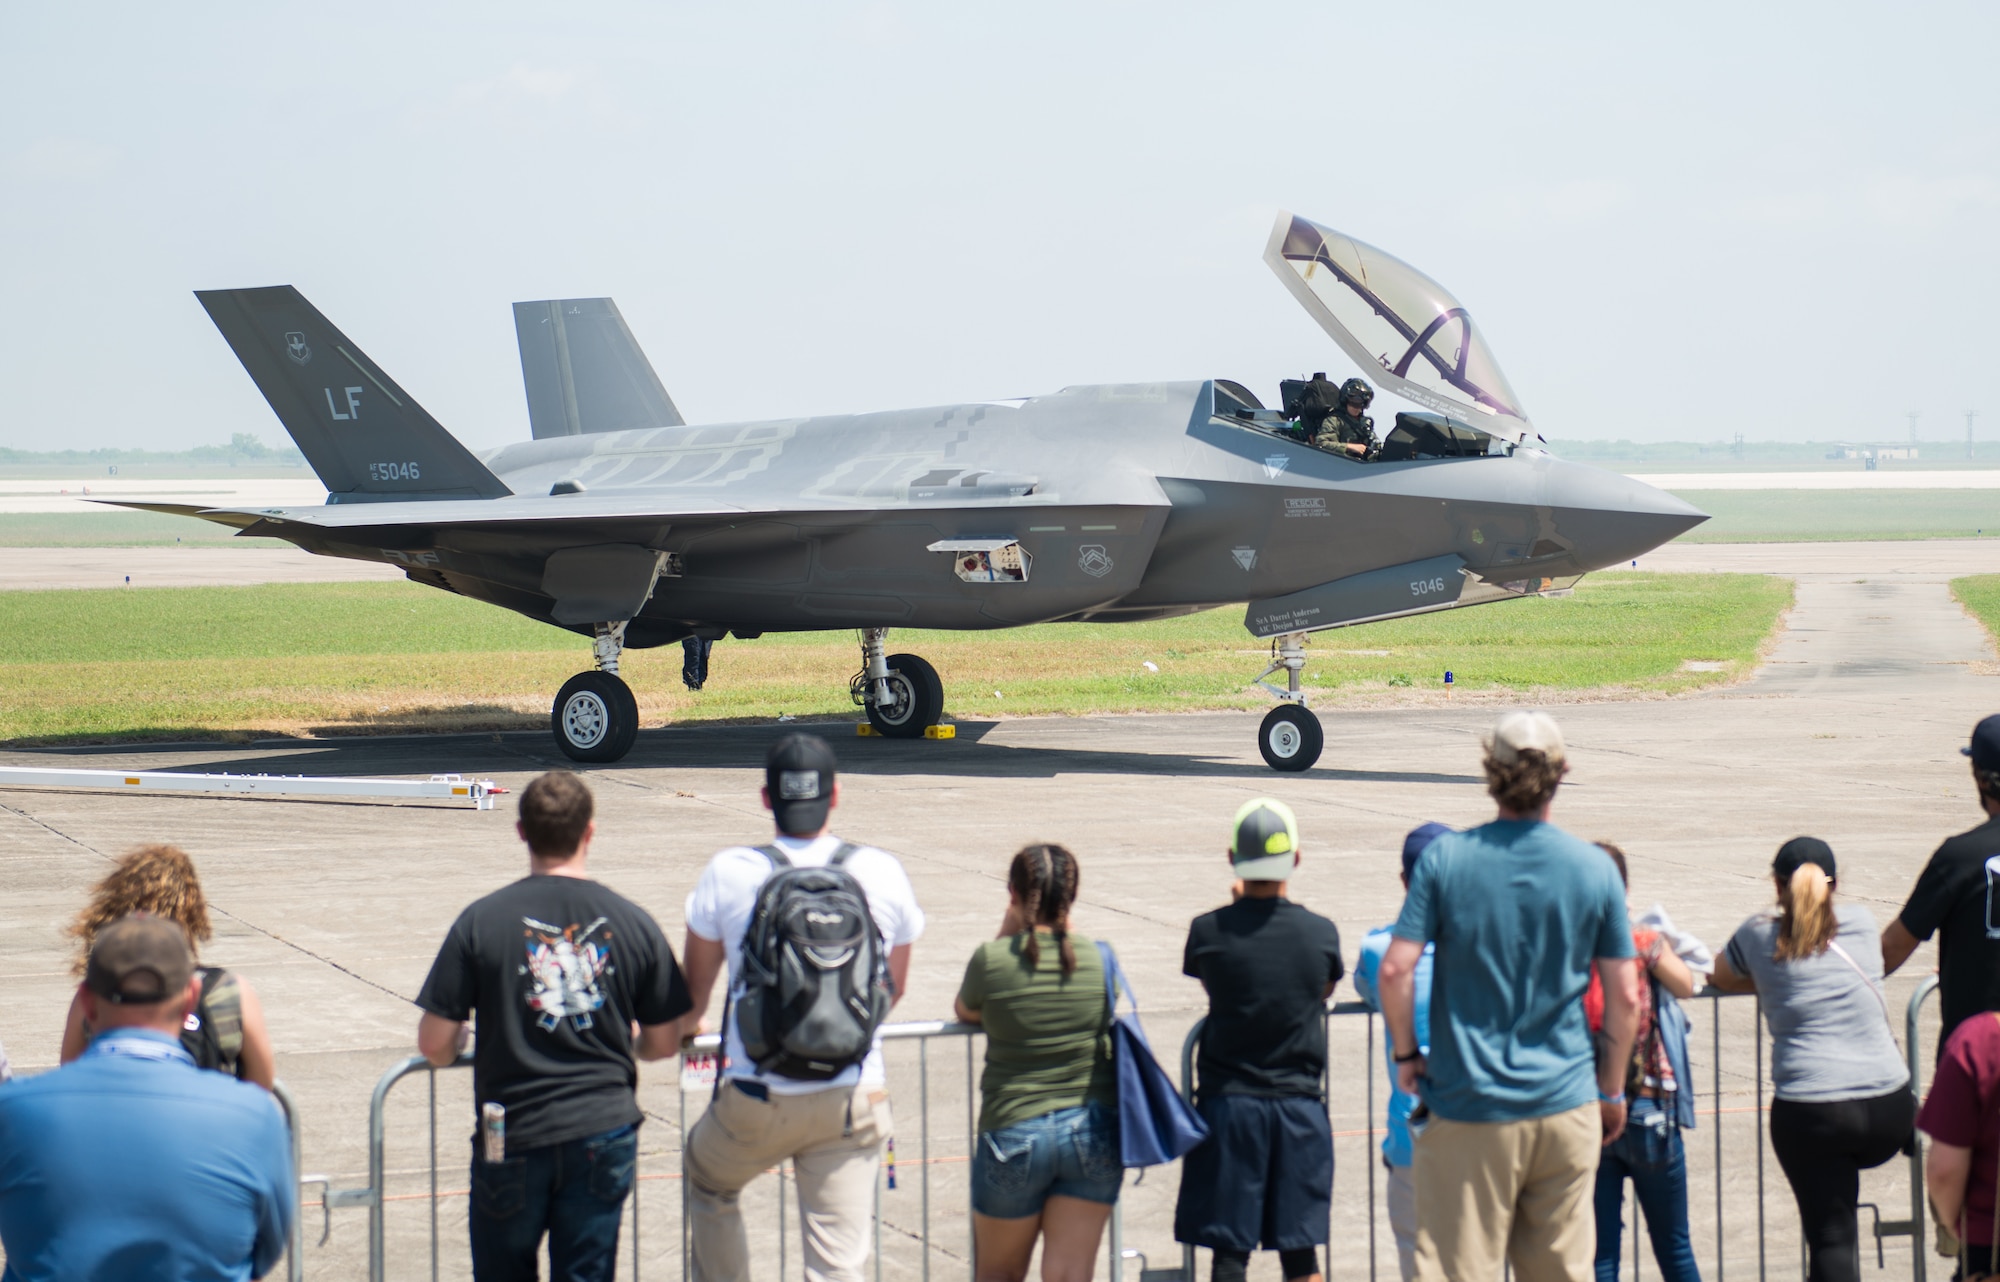 Air show guests watch as Capt. Andrew “Dojo” Olson, F-35 Heritage Flight Team pilot, prepares for a flight in an F-35 Lightning II during the Wings Over South Texas air show at Naval Air Station, Texas, March 25, 2018. Throughout the air show season, the F-35 HFT will perform at 13 air shows around the world. (U.S. Air Force photo by Airman 1st Class Alexander Cook)